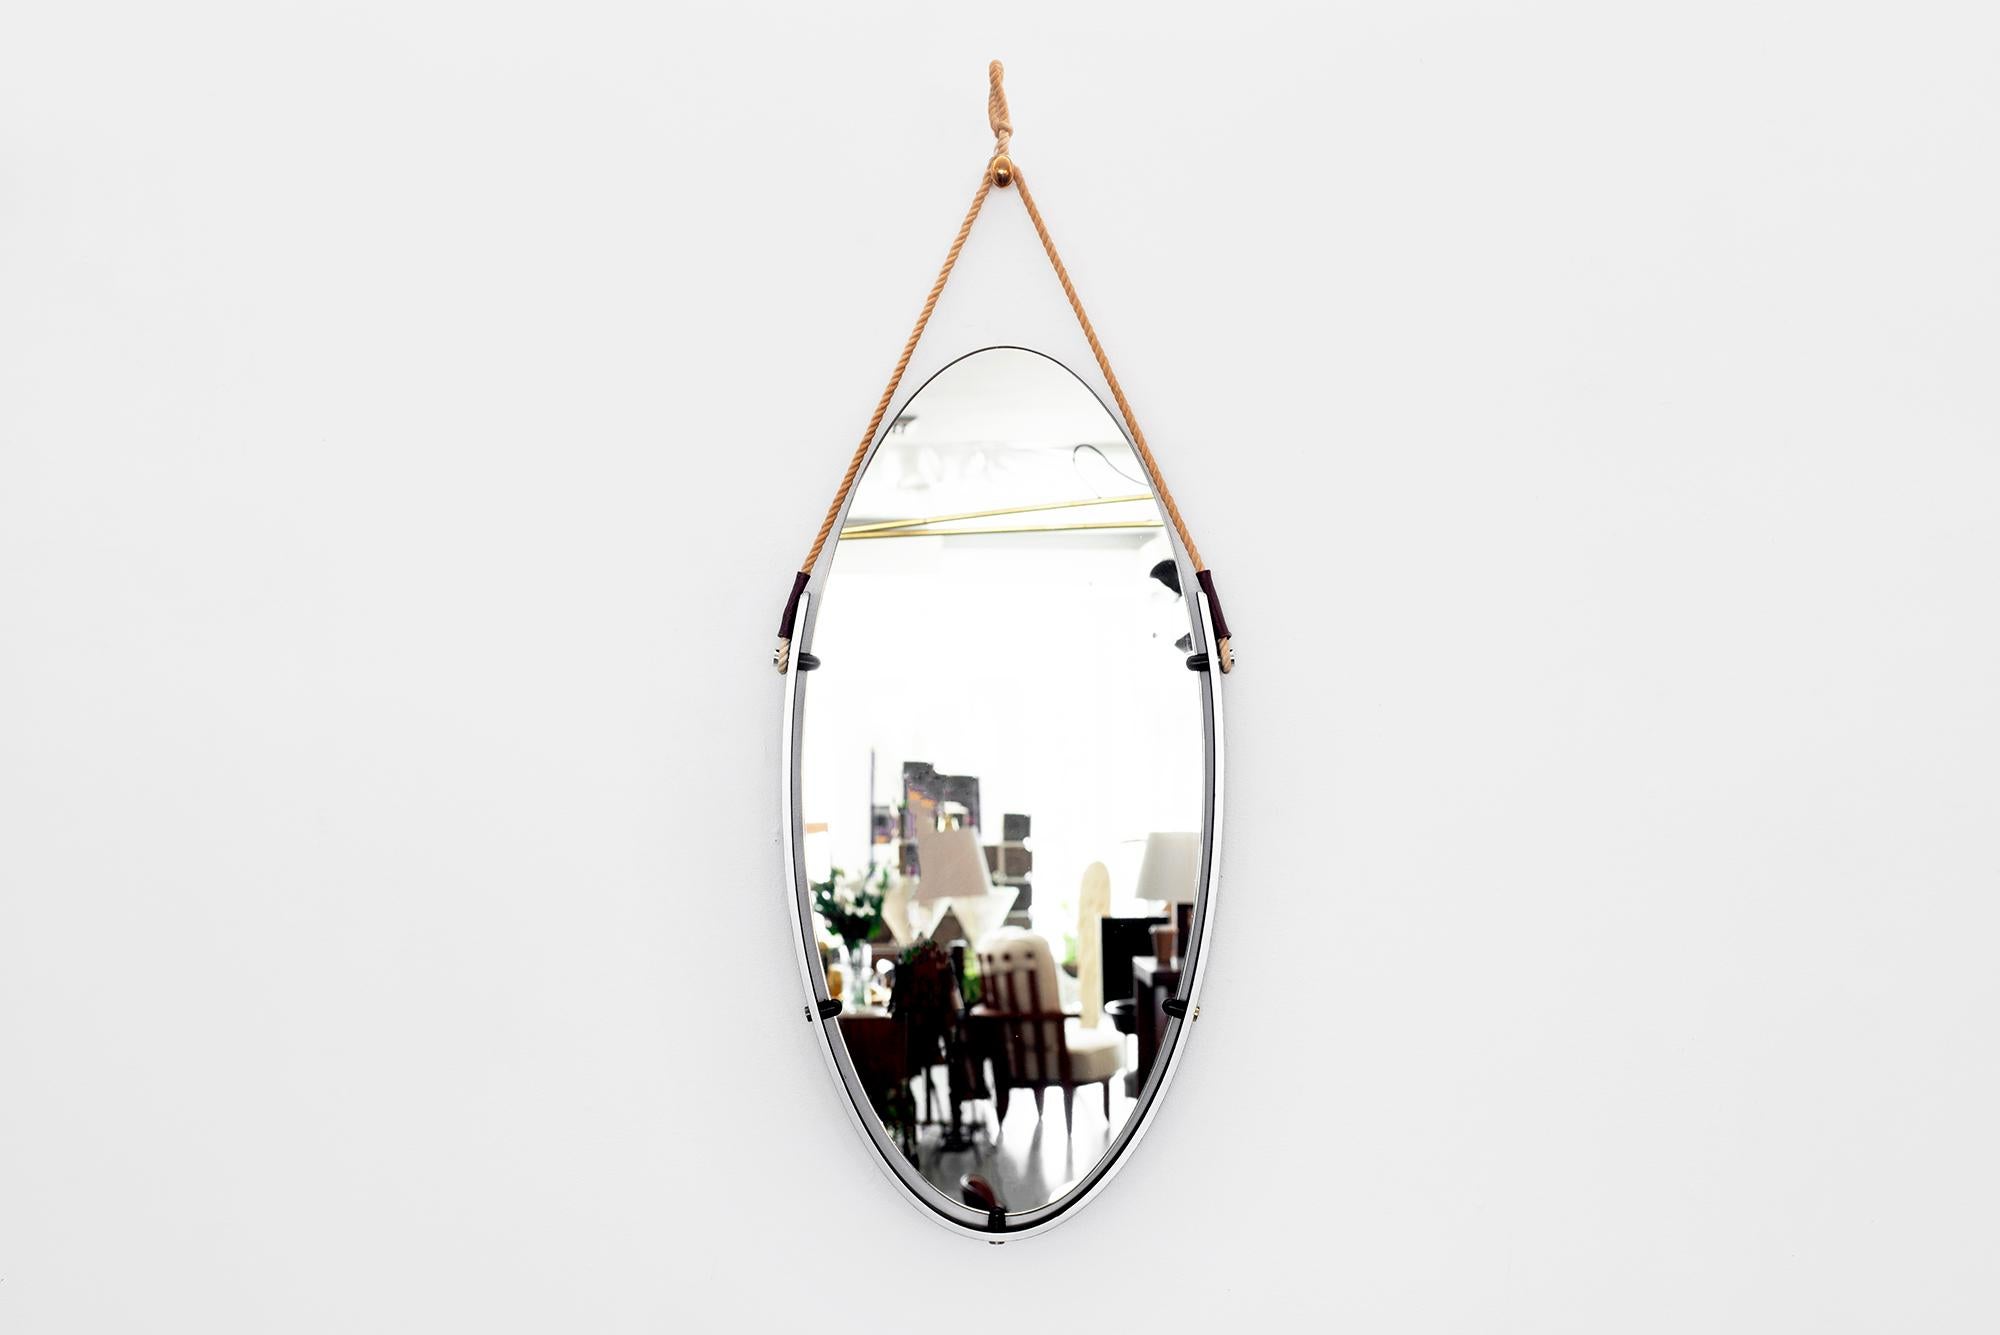 Fantastic 1960s Italian mirror floating in iron frame with rope and leather detail.
Oval shape with open edged top 

Overall dimensions including rope:
W 15 1/2”
H 41”
D 1 1/4”.